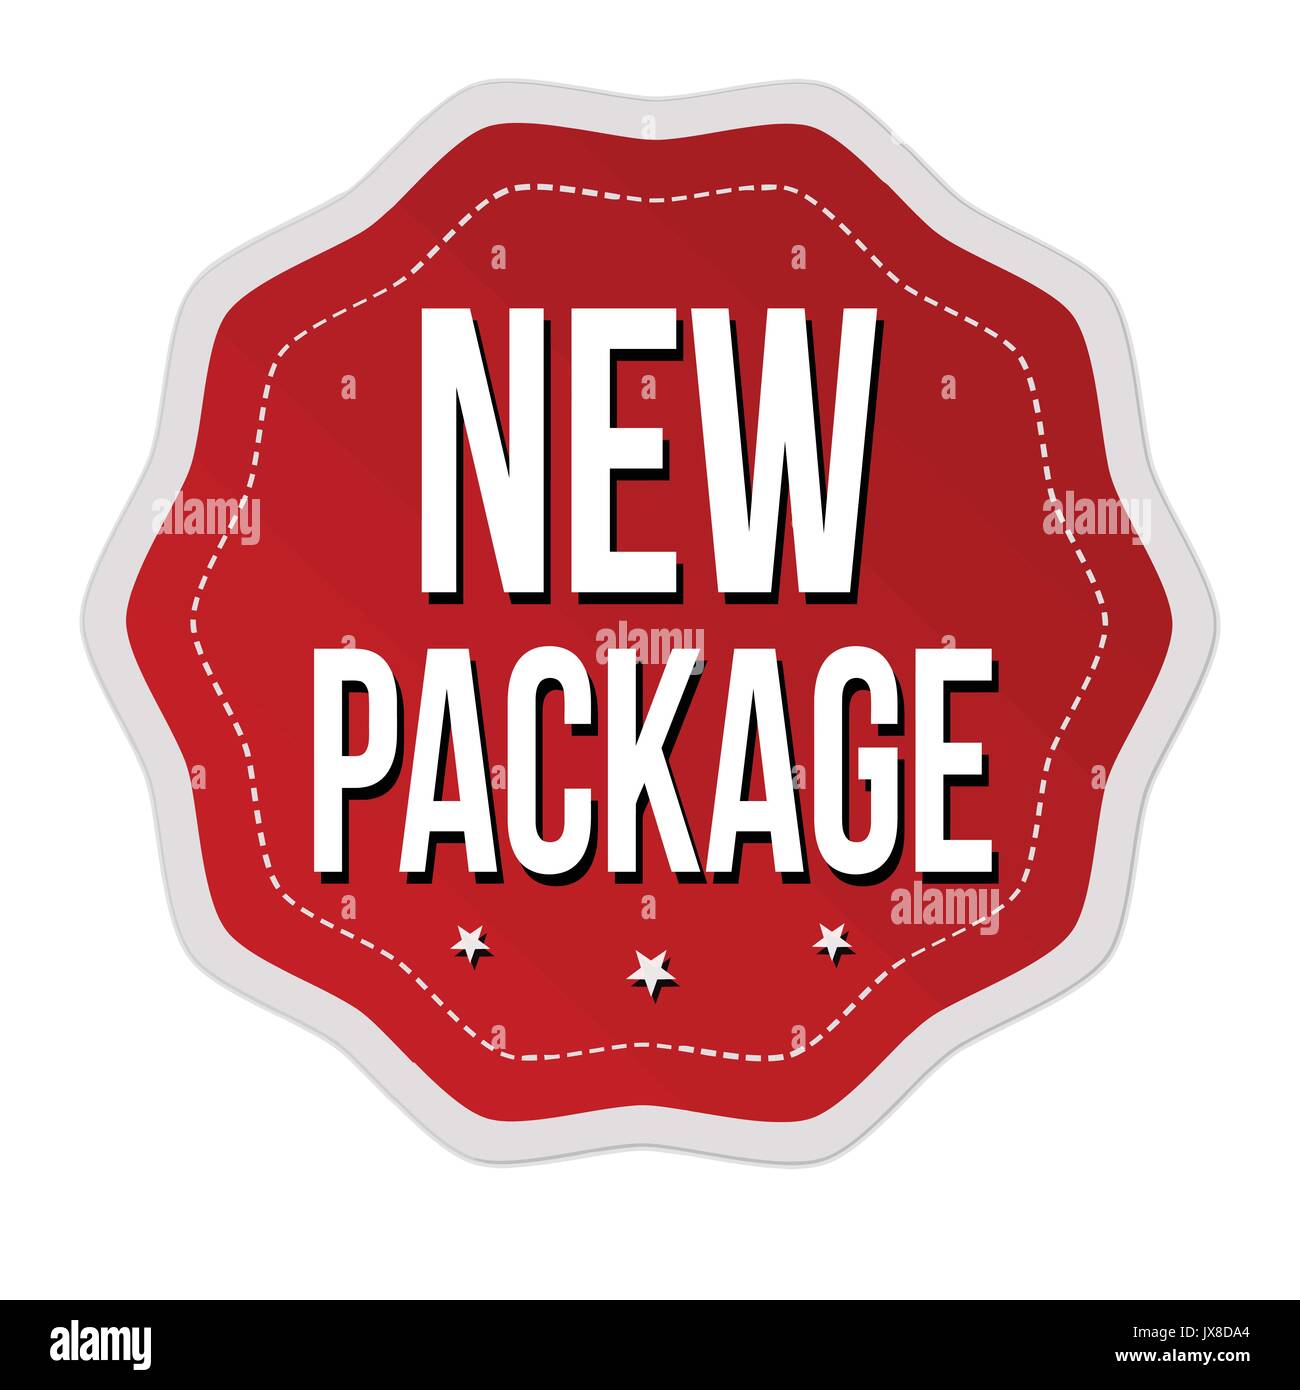 New package sticker or label on white background, vector illustration Stock Vector